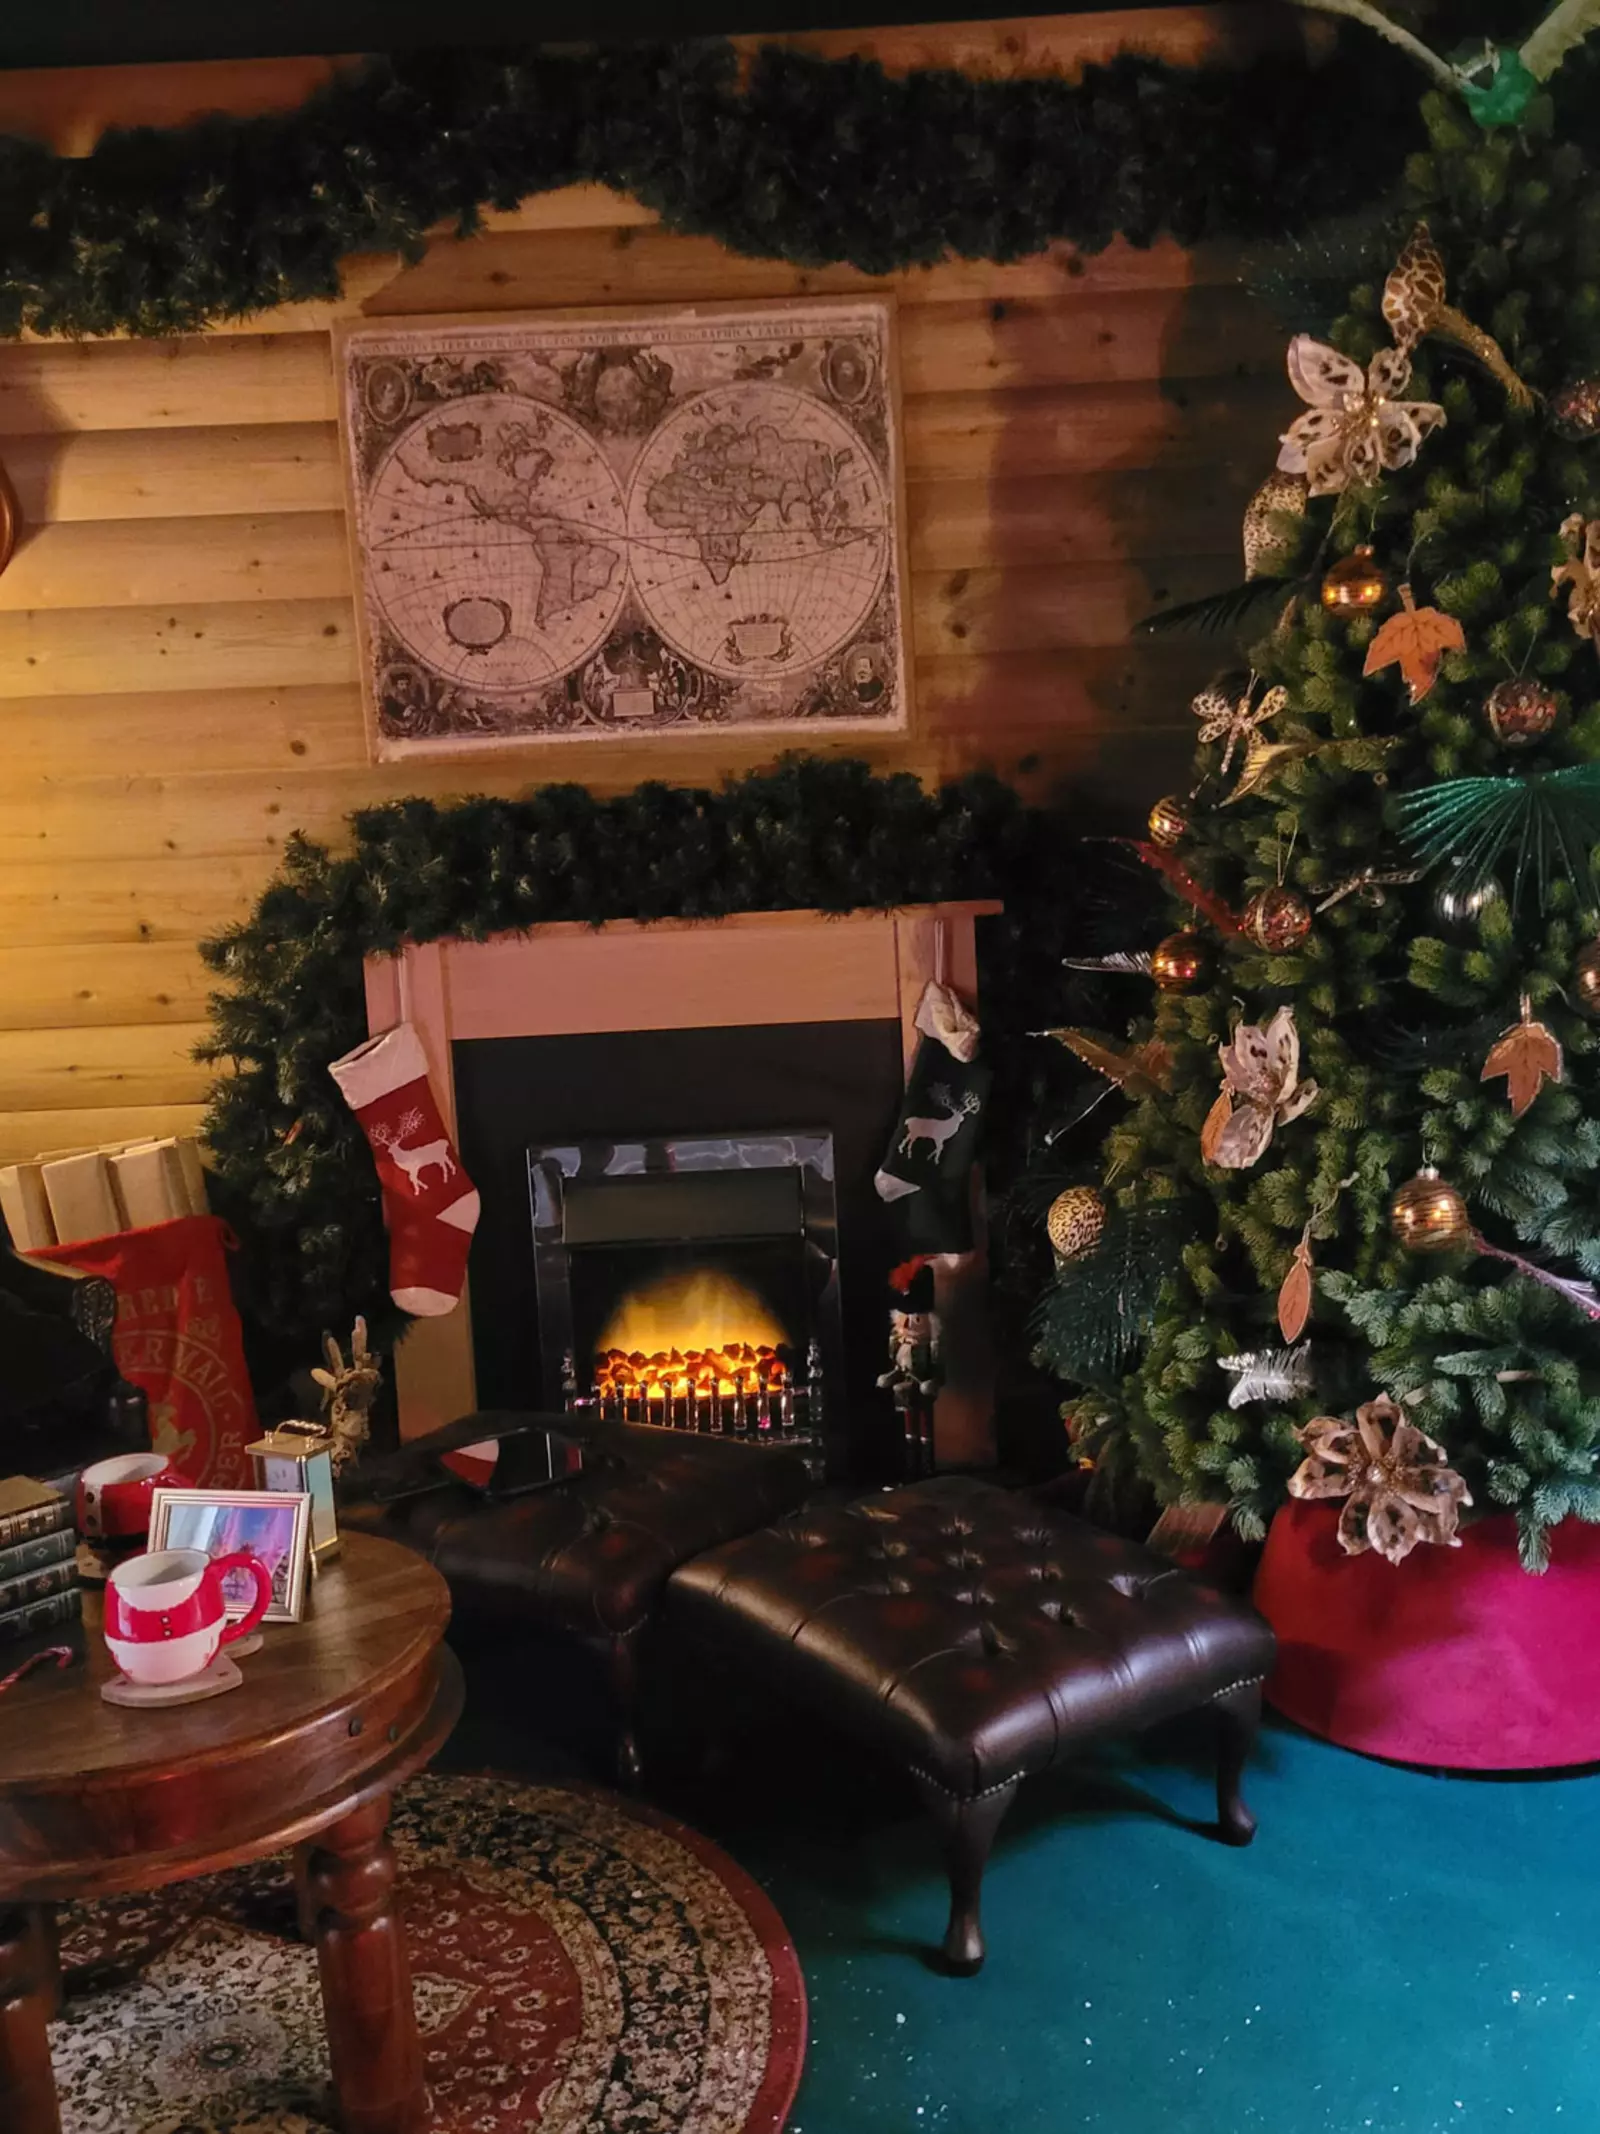 Christmas grotto decorated with a Christmas tree and stockings hanging on a fireplace